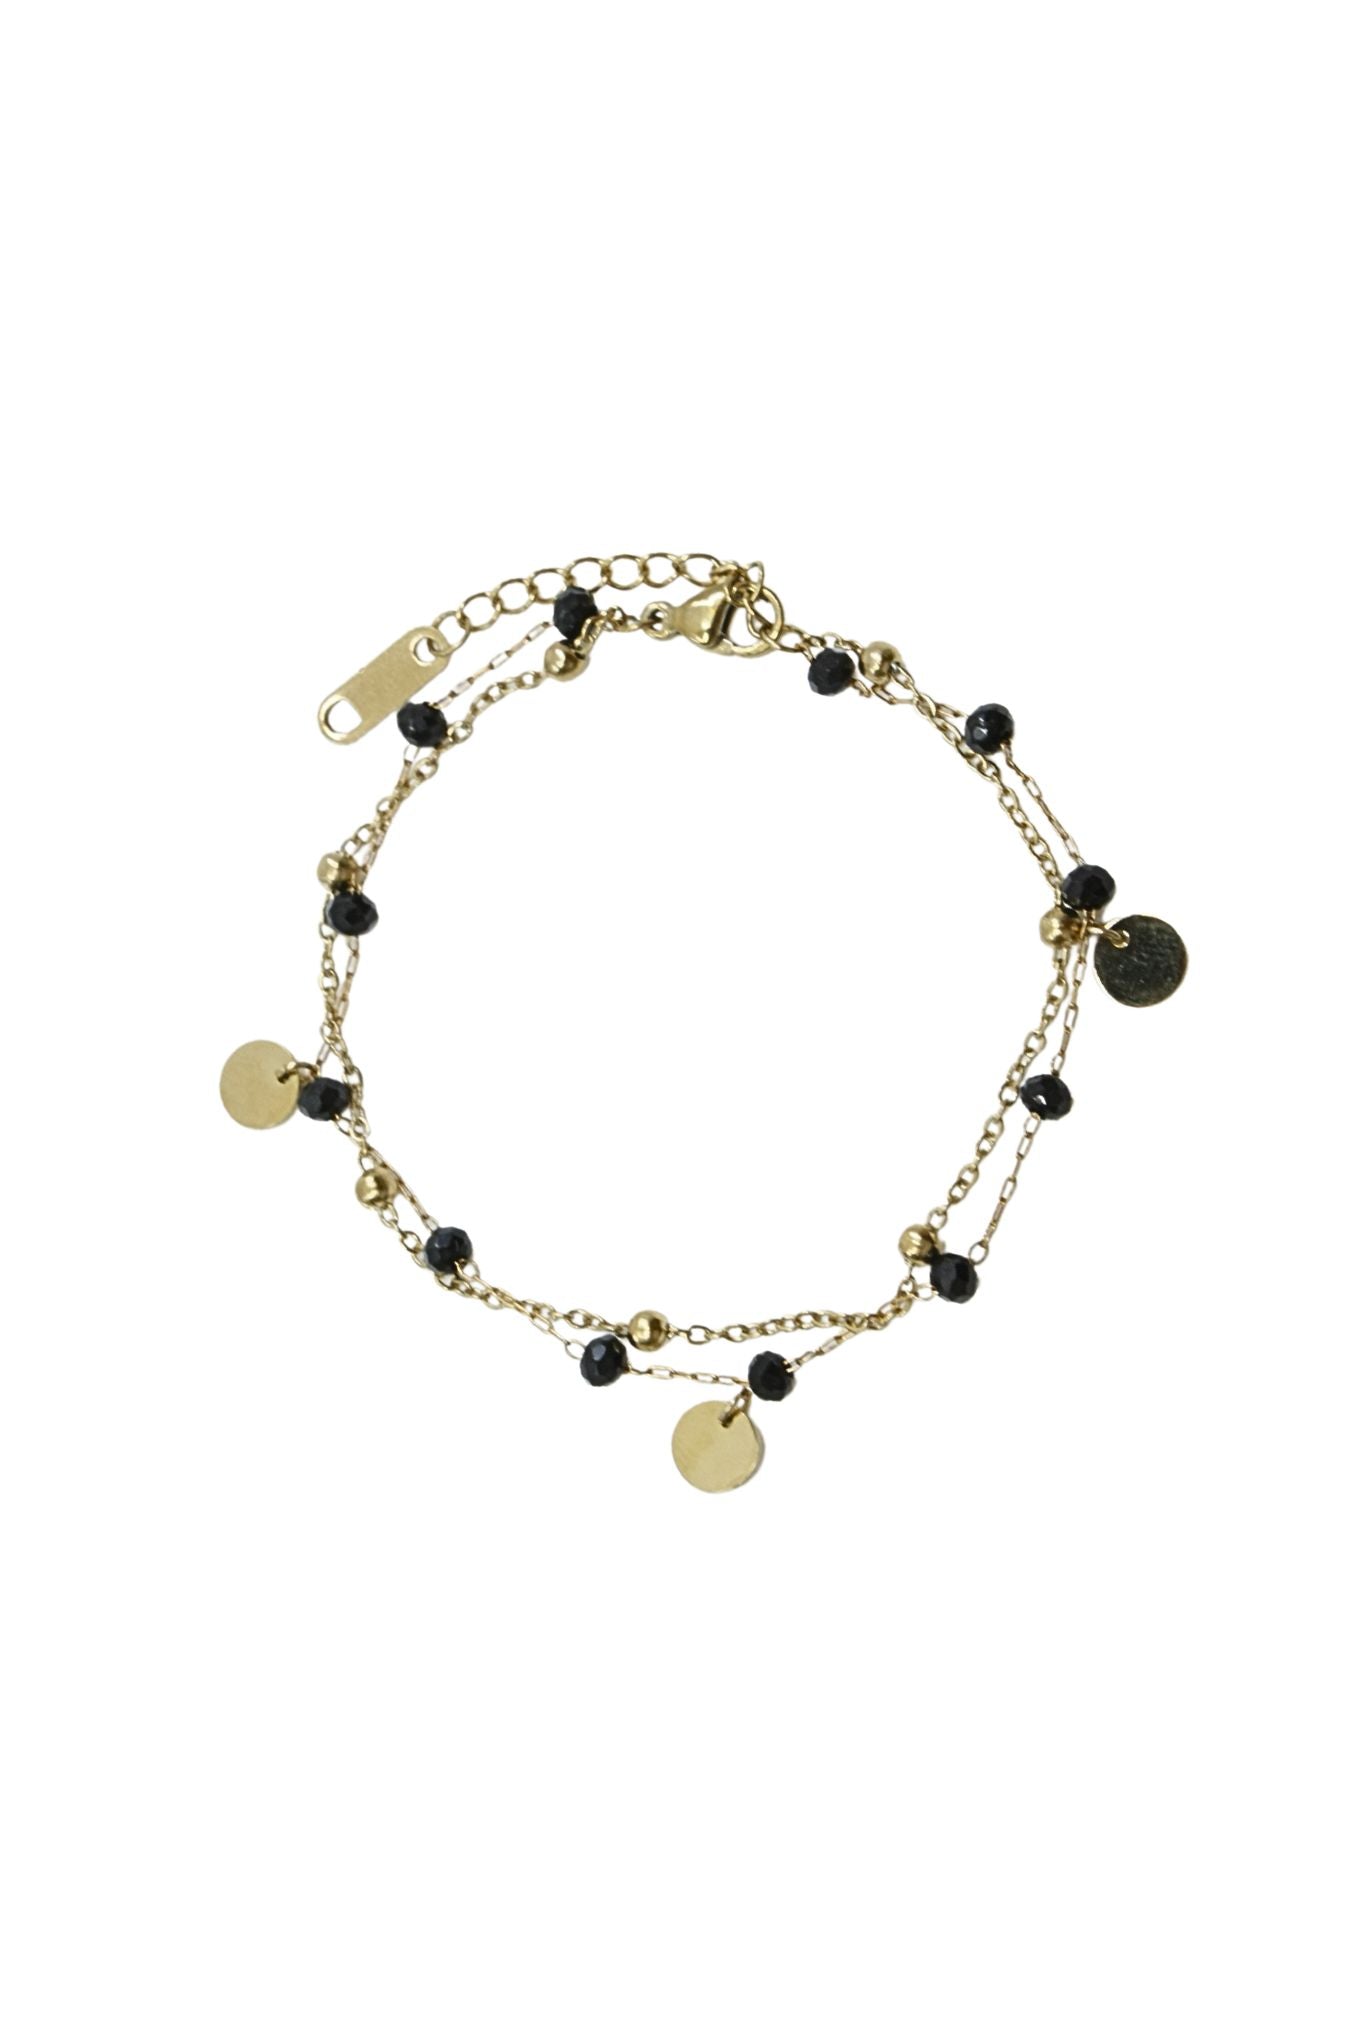 Gold and Black Crystal Layered Bracelet with Gold Accents